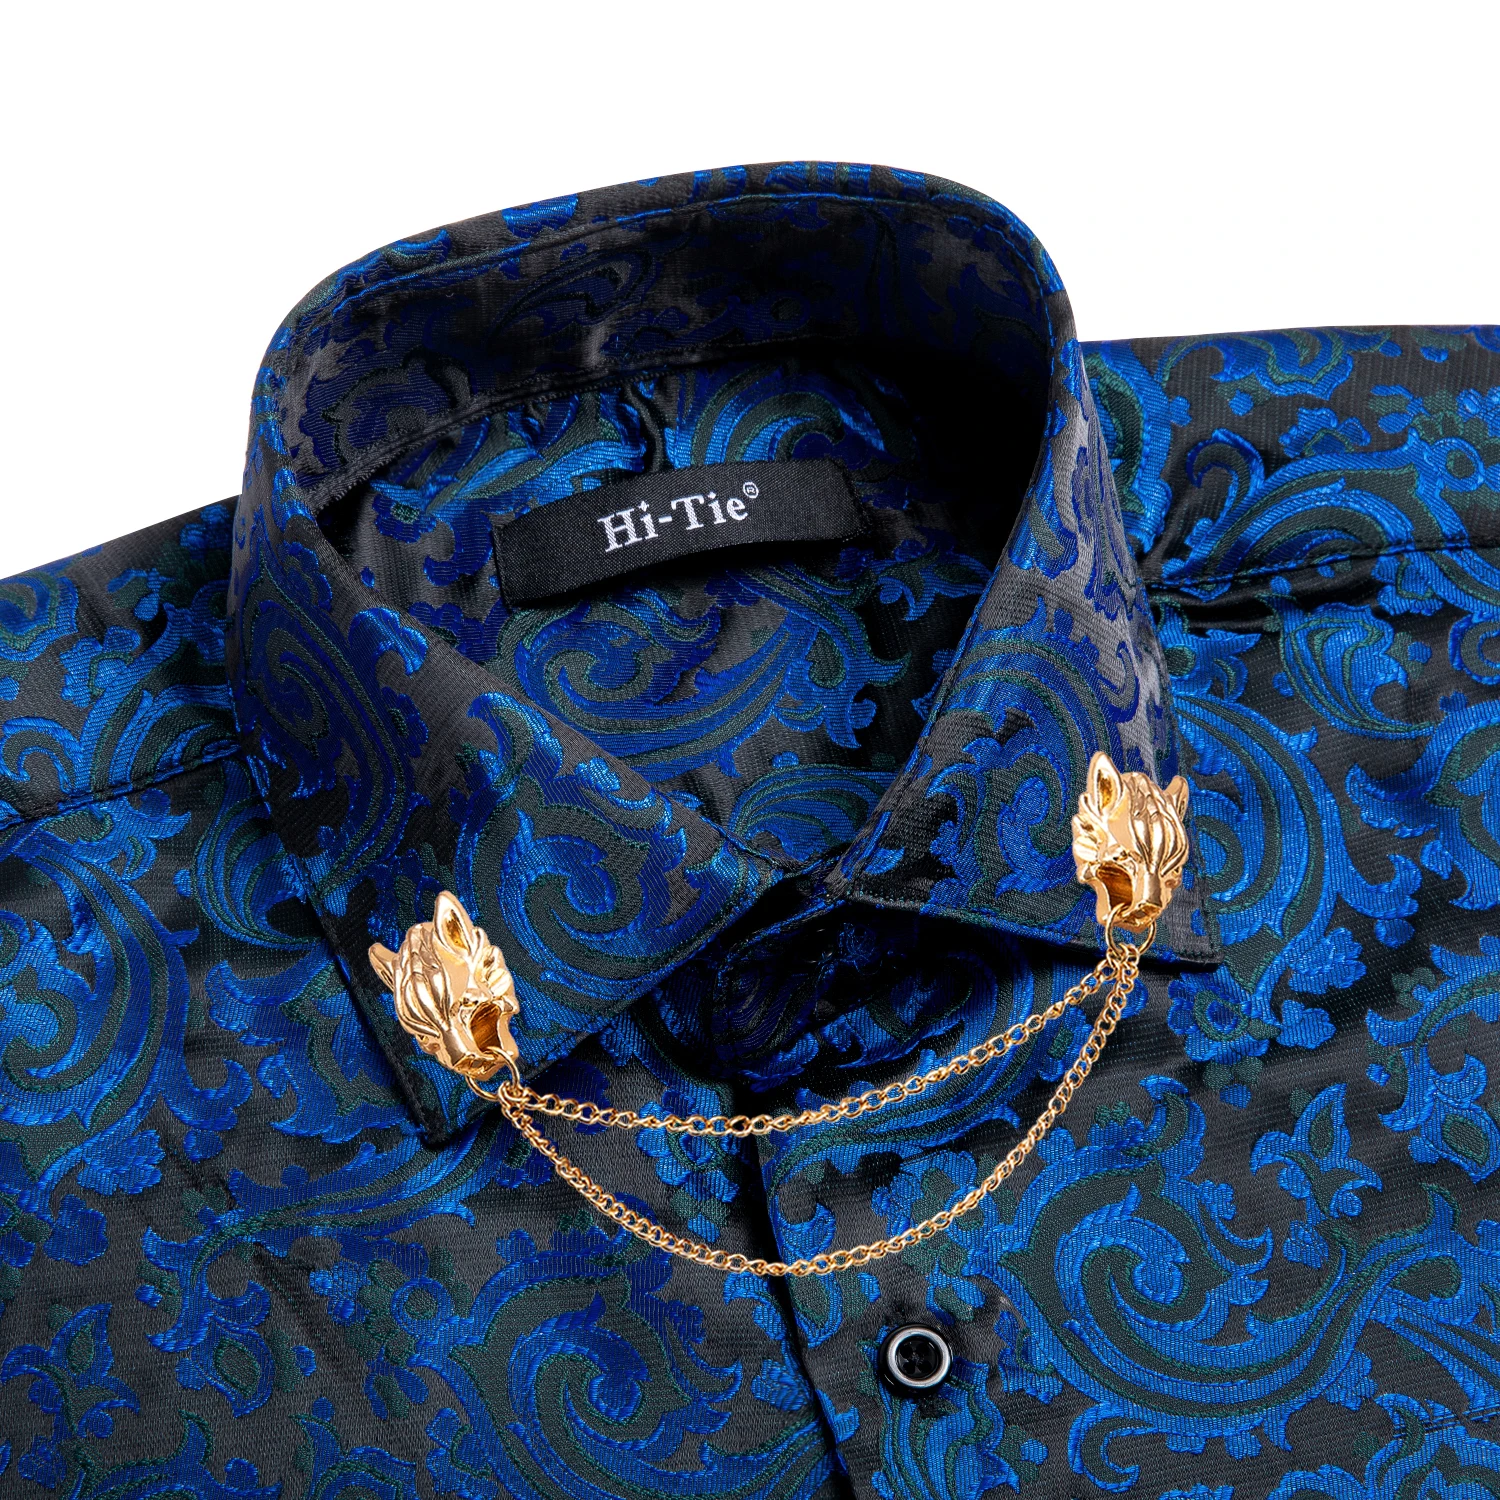 Formal Blue Black Mens Shirts Silk Spring Autumn Long Sleeve Slim Fit Paisley Jacquard Shirt For Male Business Party Gift Hi-Tie barry wang luxury silk mens scarf floral paisley stylish burgundy gold black navy blue purple for male wedding business party